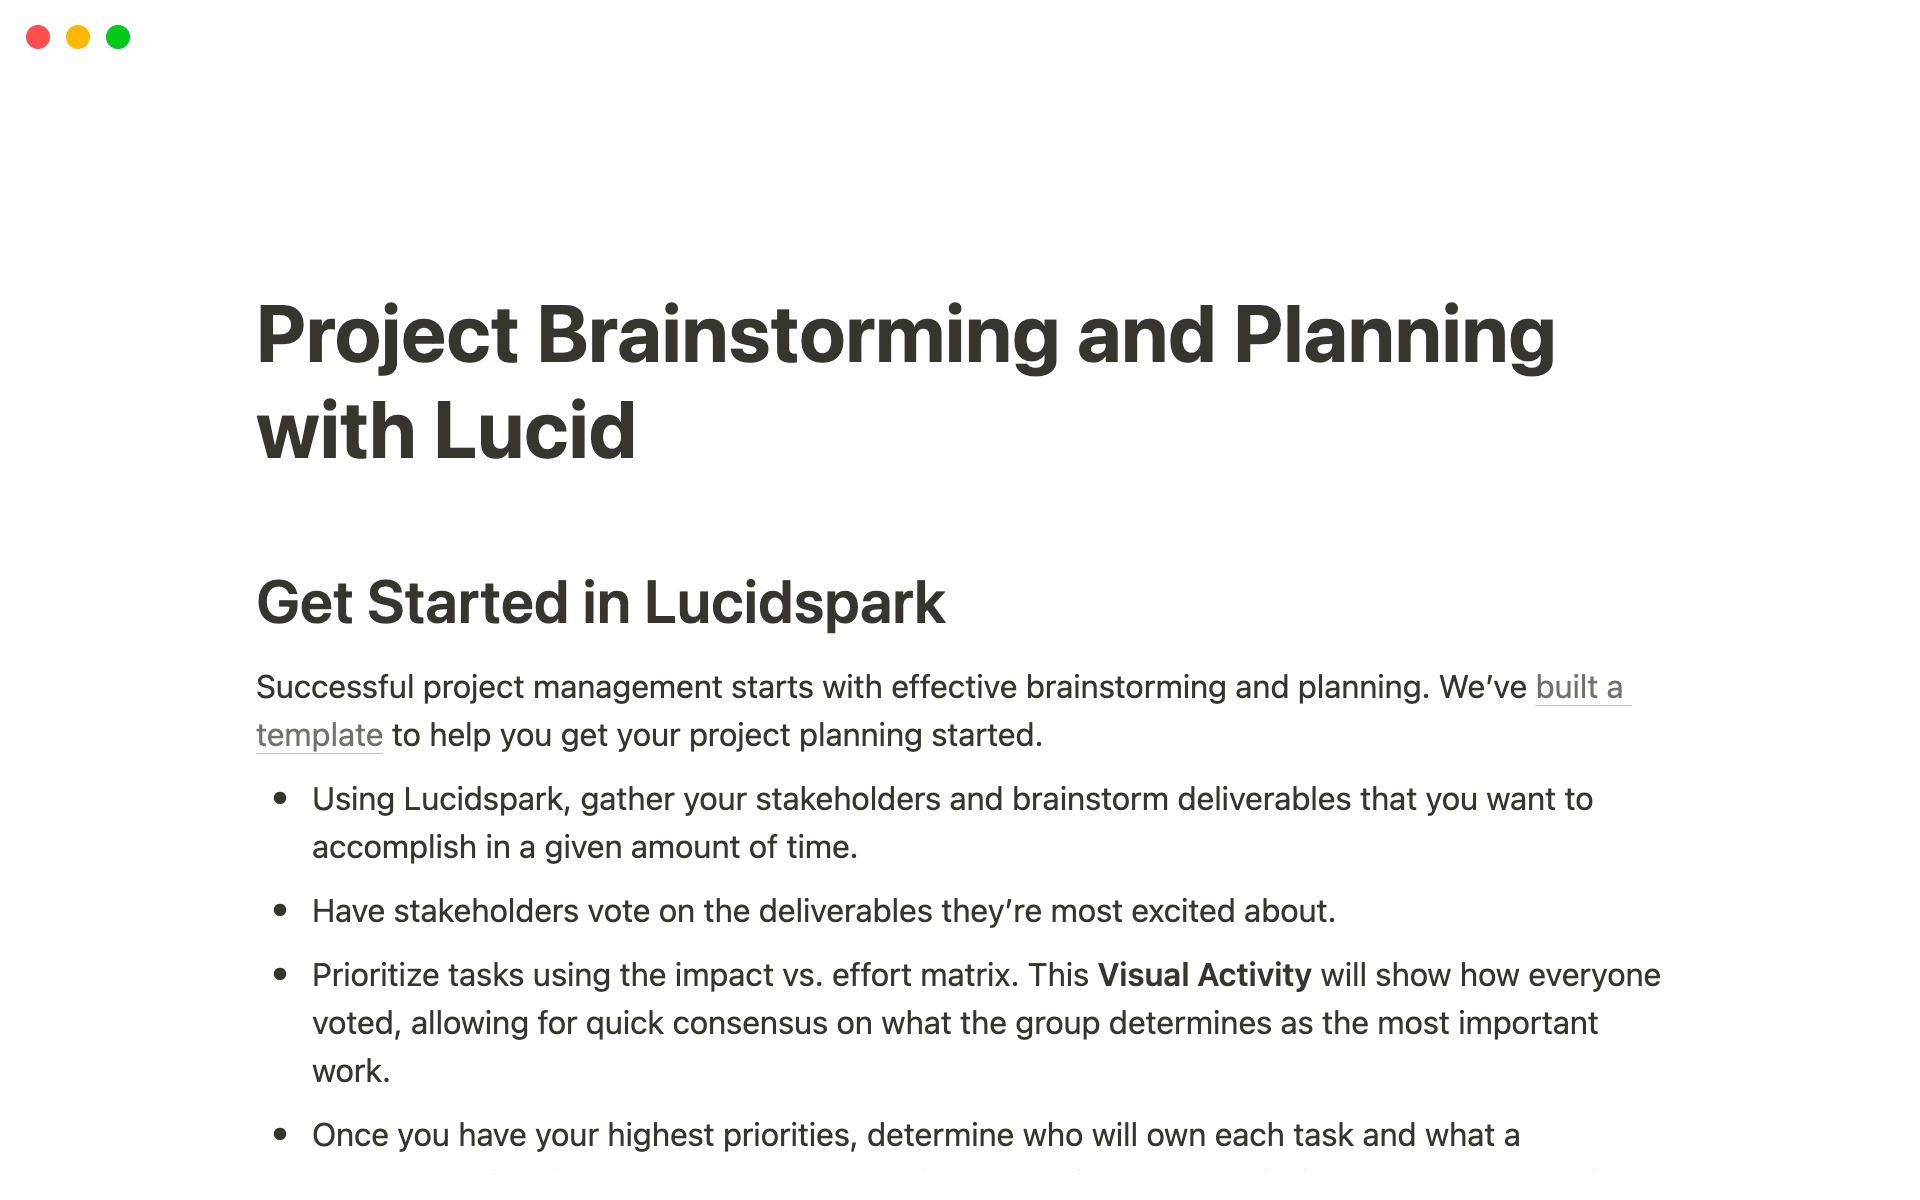 Use Lucidspark to get started with project brainstorming and continue your planning within this Notion template.